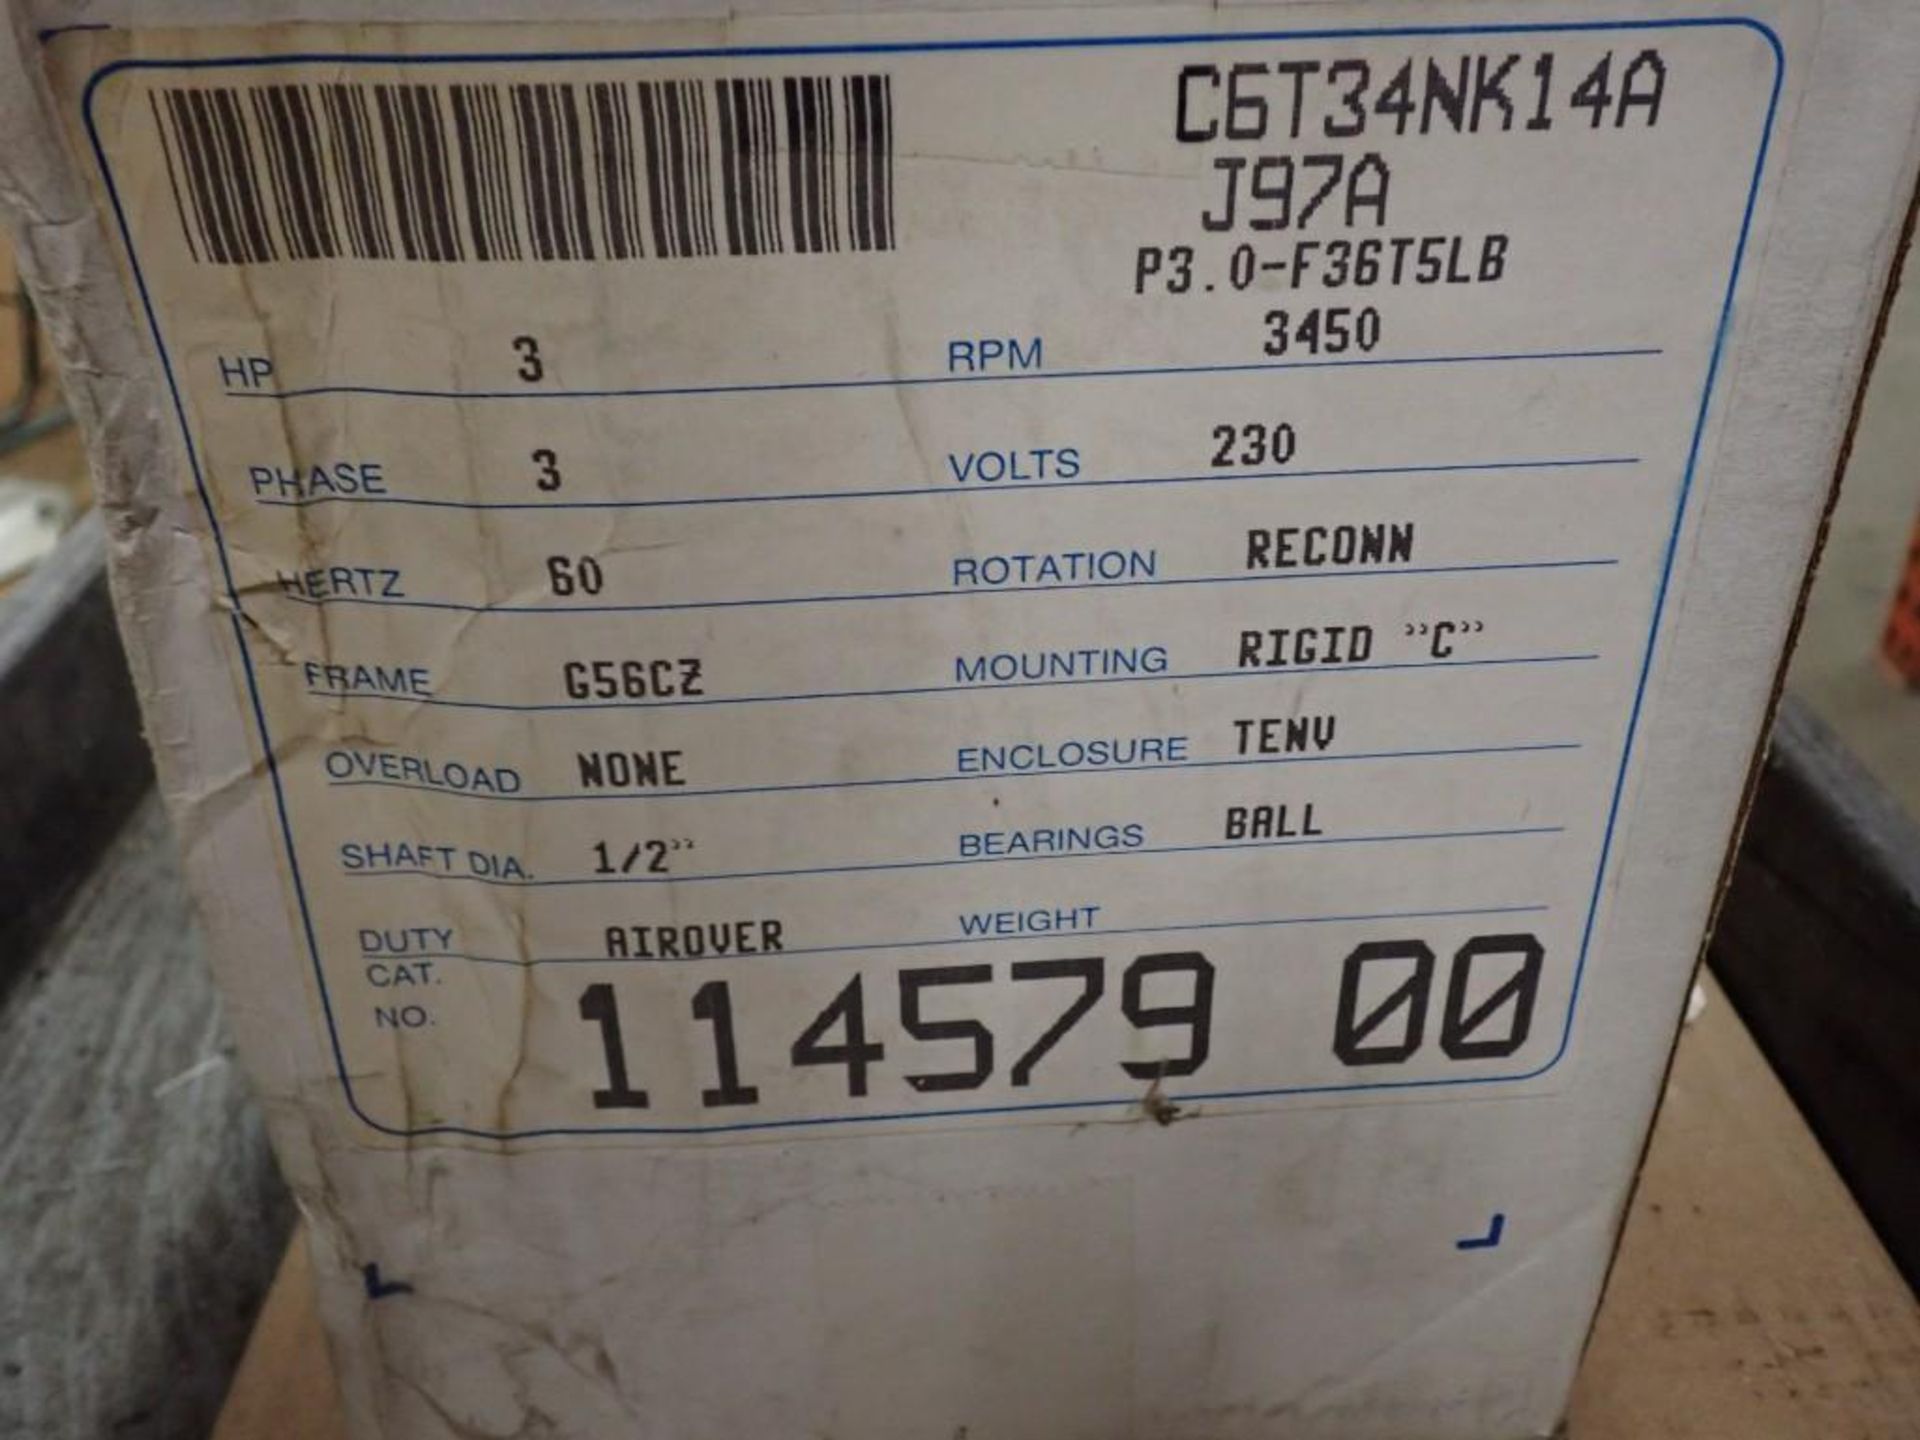 NEW Leeson 3 HP, Electric Motor, C6T34NK14A, 3450 RPM, 230V - Image 4 of 4